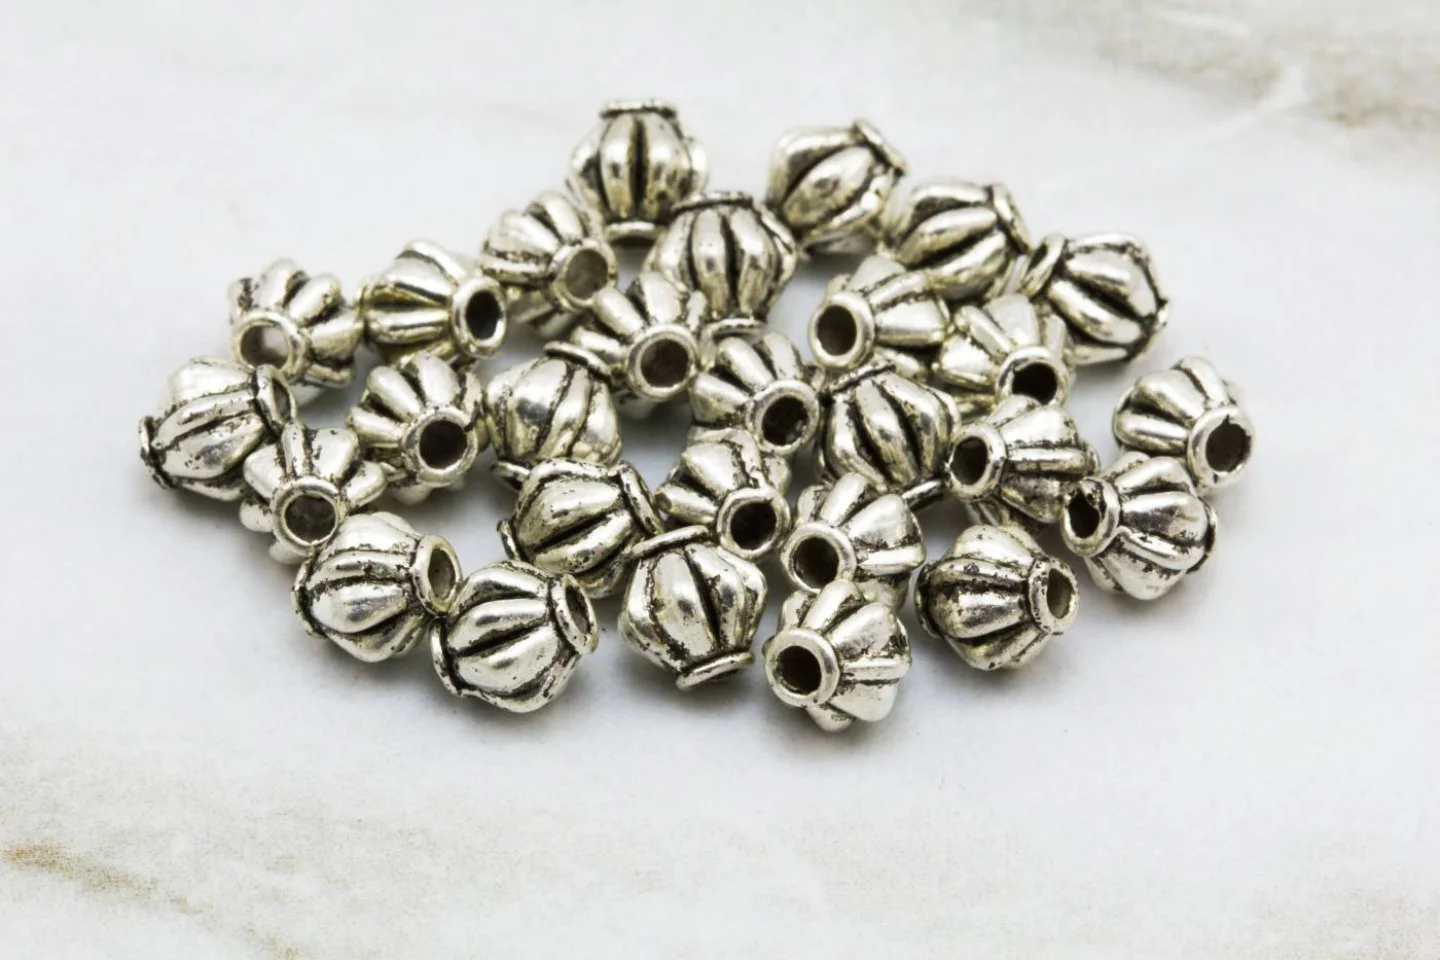 6mm-round-silver-beads-findings-supplies.